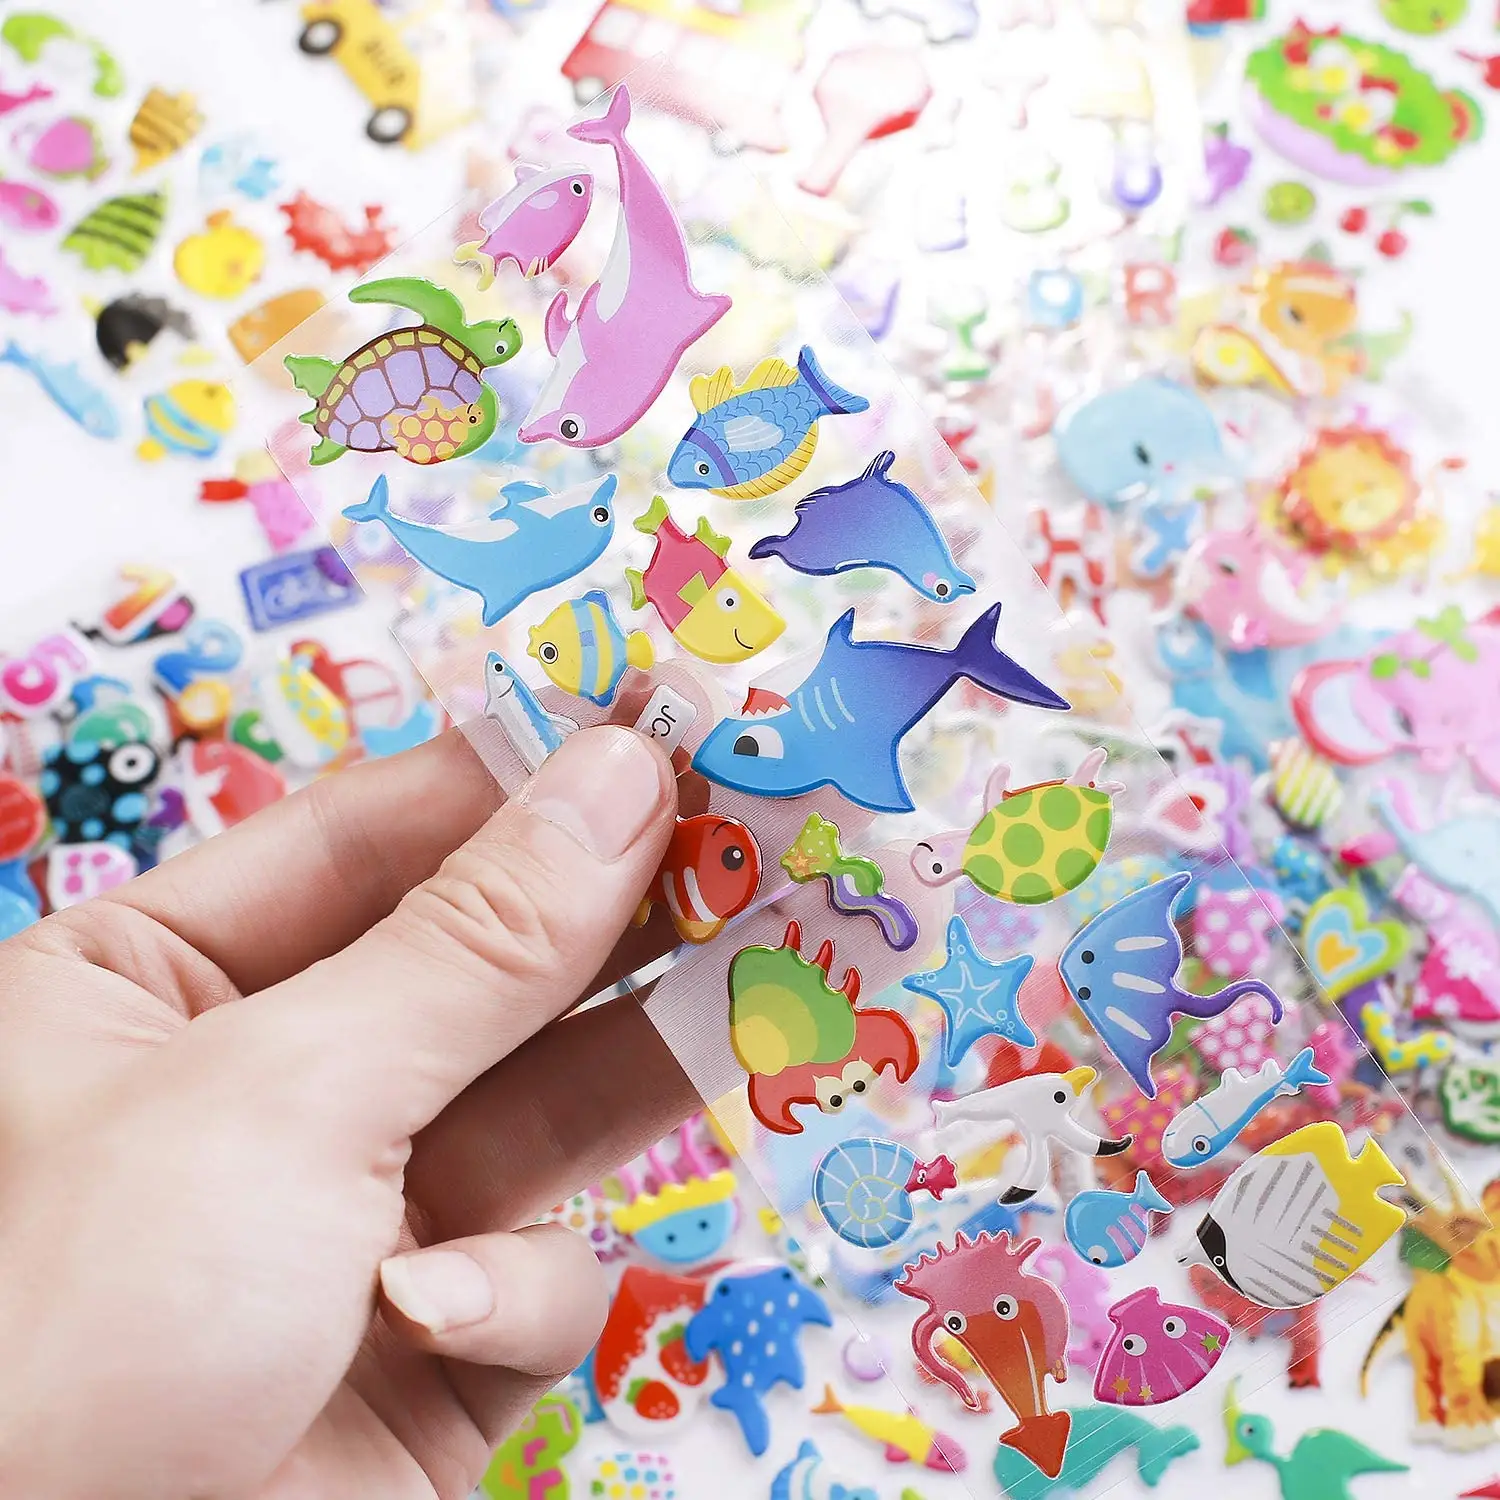 Removable decal 3D memePuffy stickers Custom Foam bubble adhesive cartoon animal stickers bulk sets party box fillers